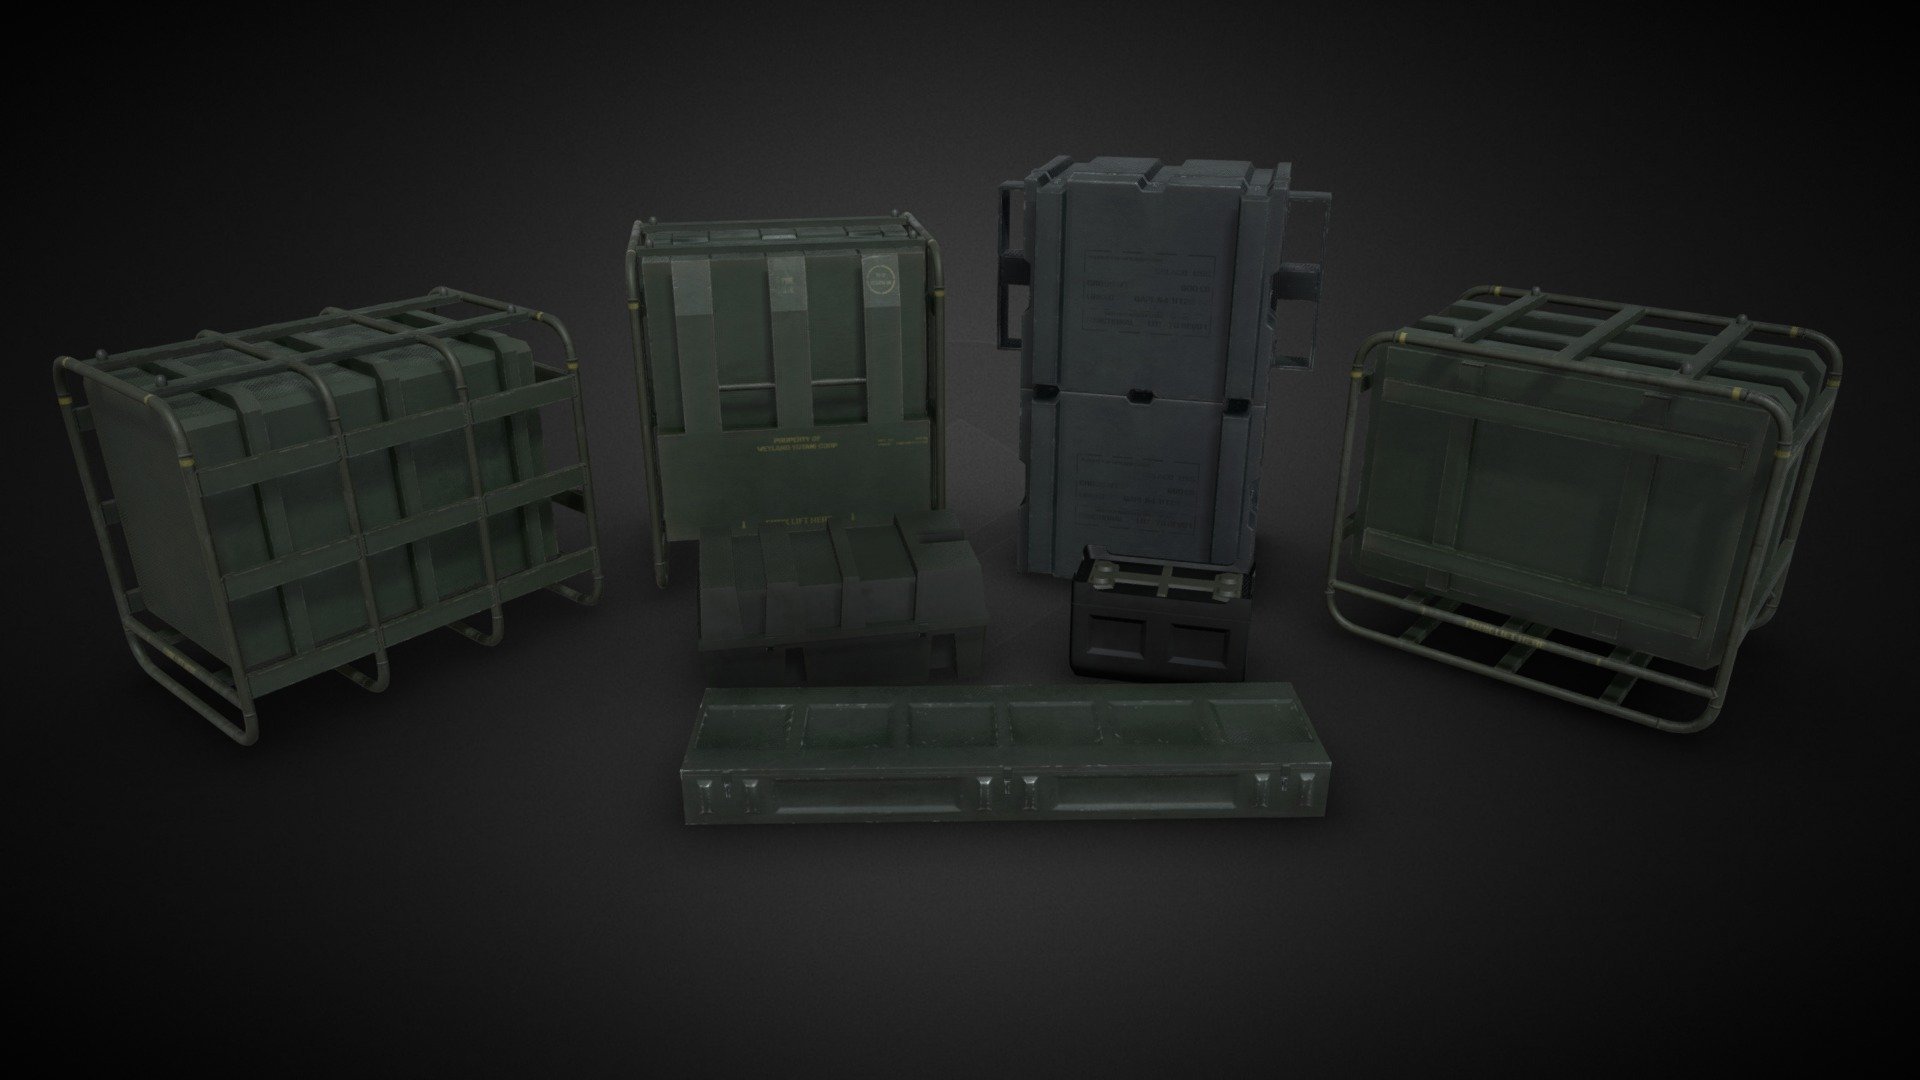 A set of storage props from the movie «Aliens 1986»
All the storage were located in the hangar of the Sulaco spacecraft - Storage set - 3D model by BAA Design (@baa_design) 3d model